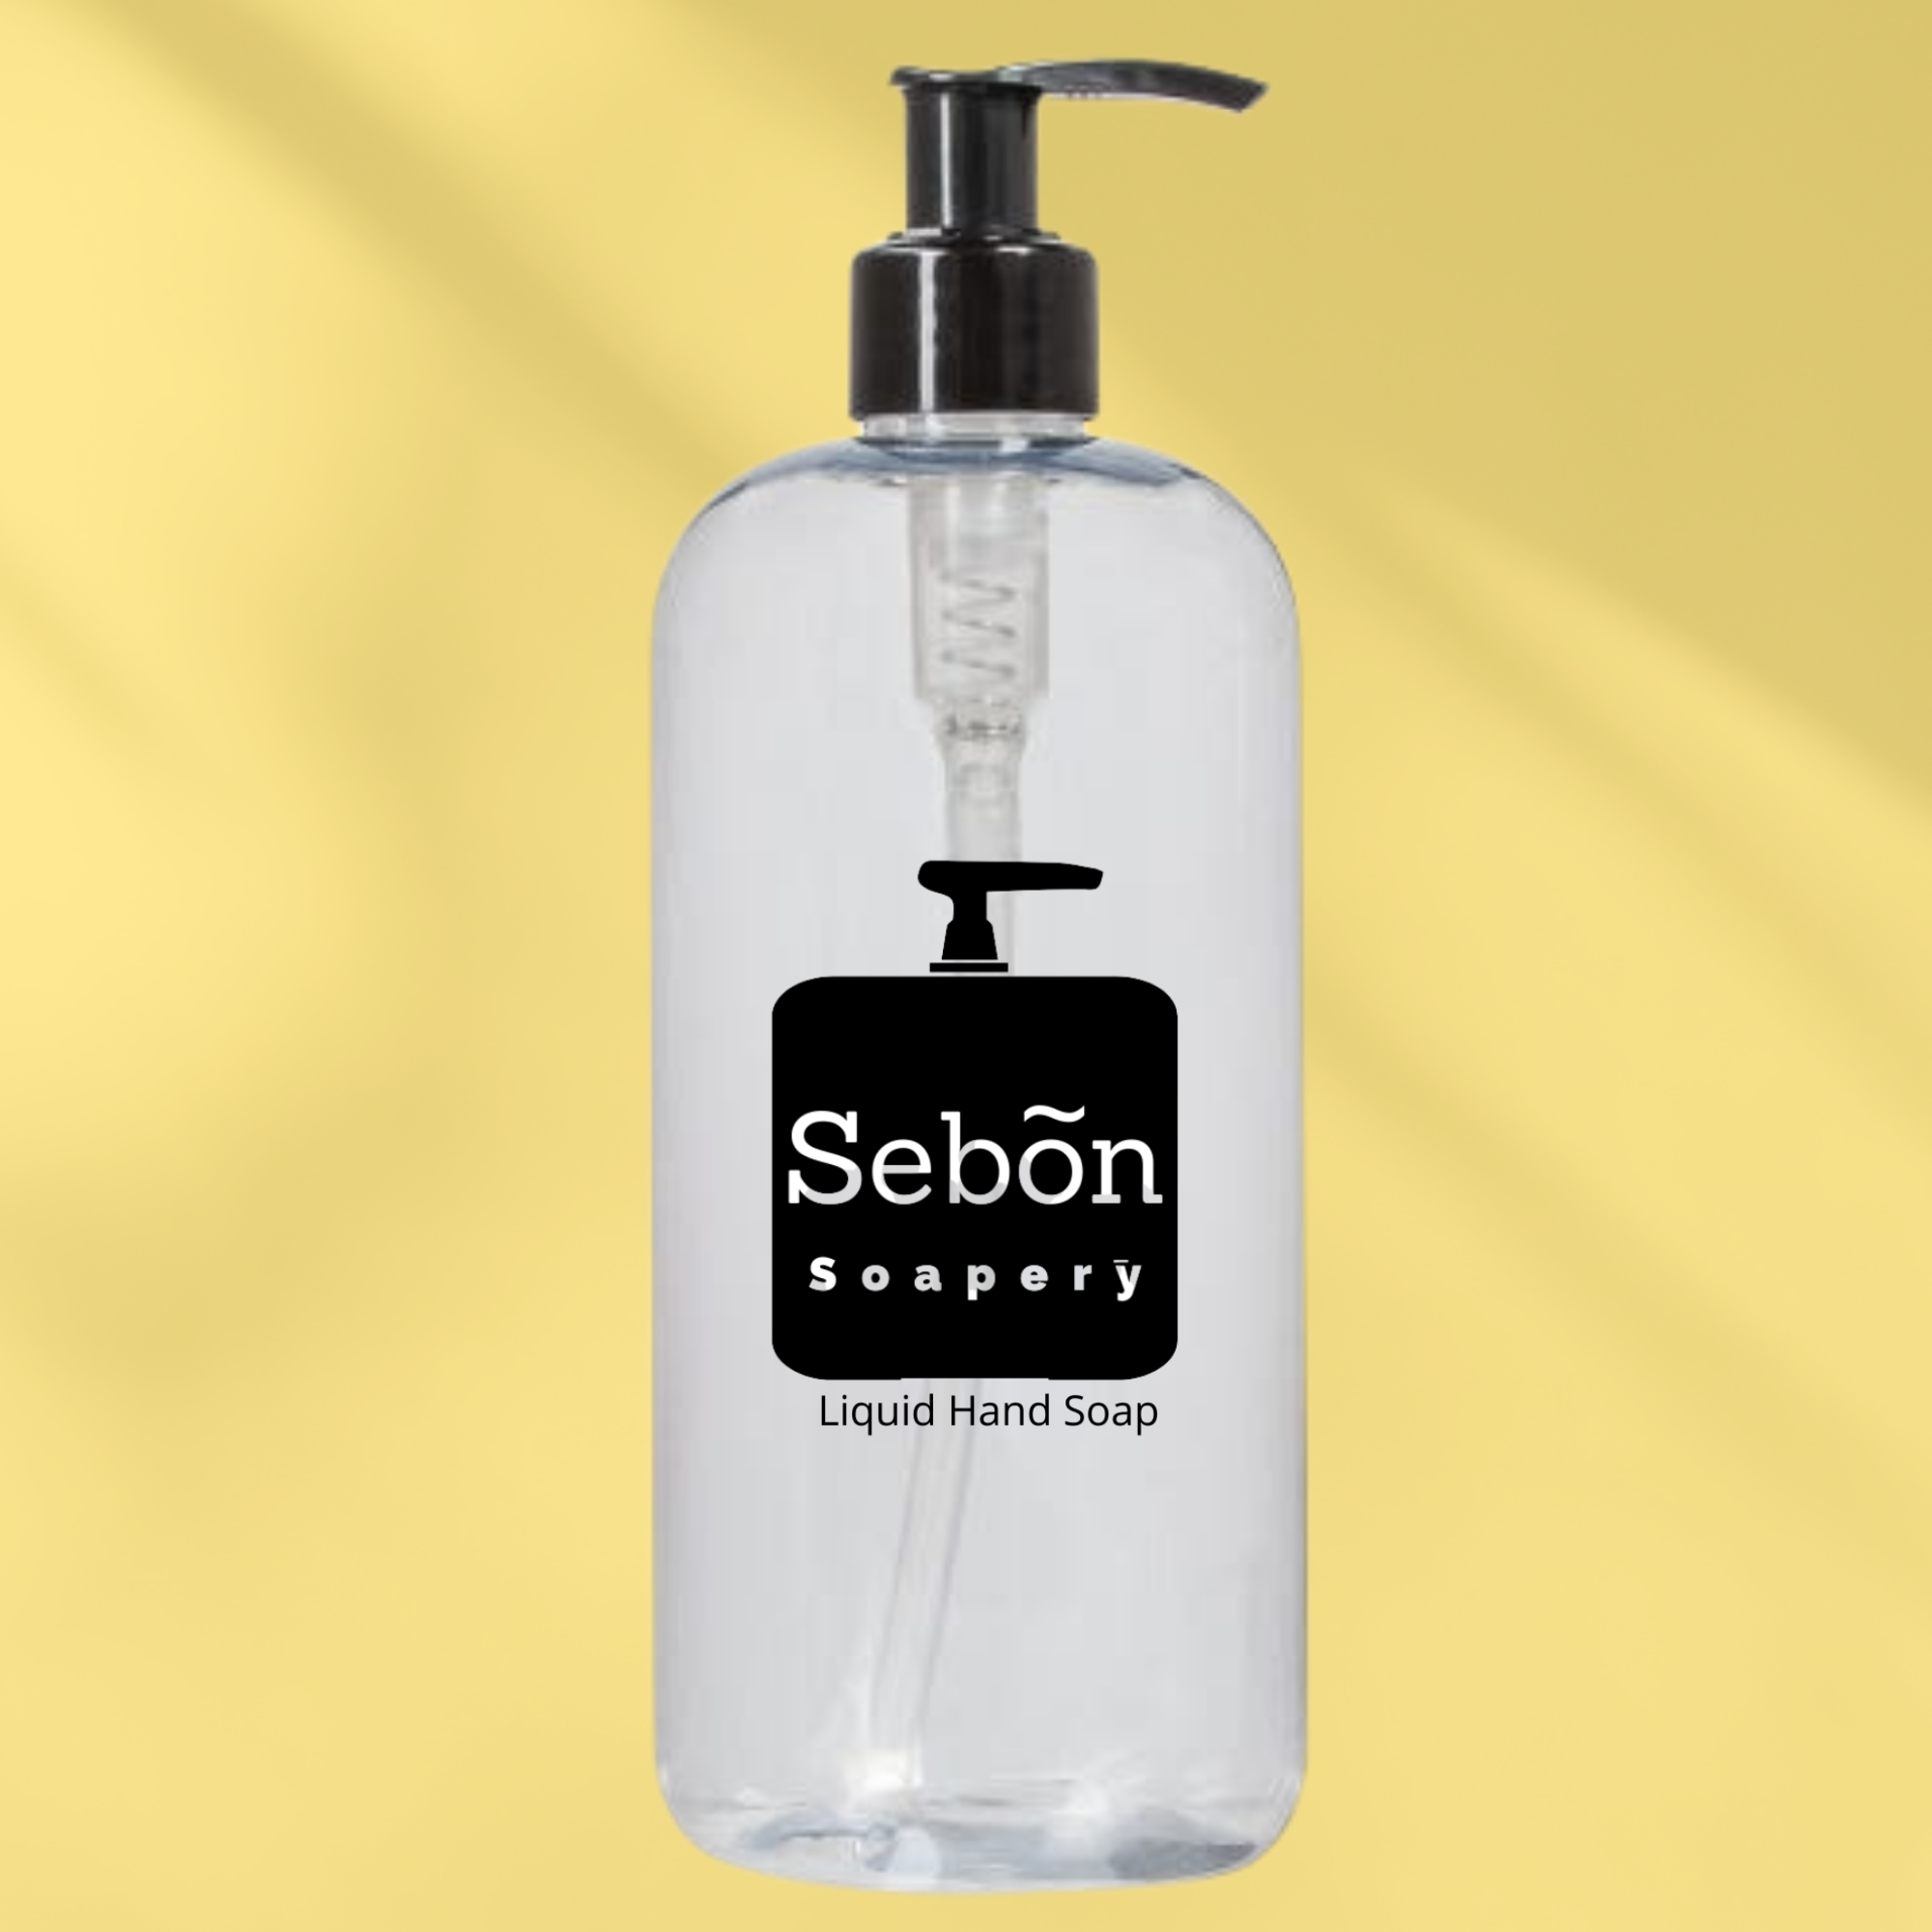 Sebon Apples & Oranges Scented Liquid Hand Soap with Olive Oil